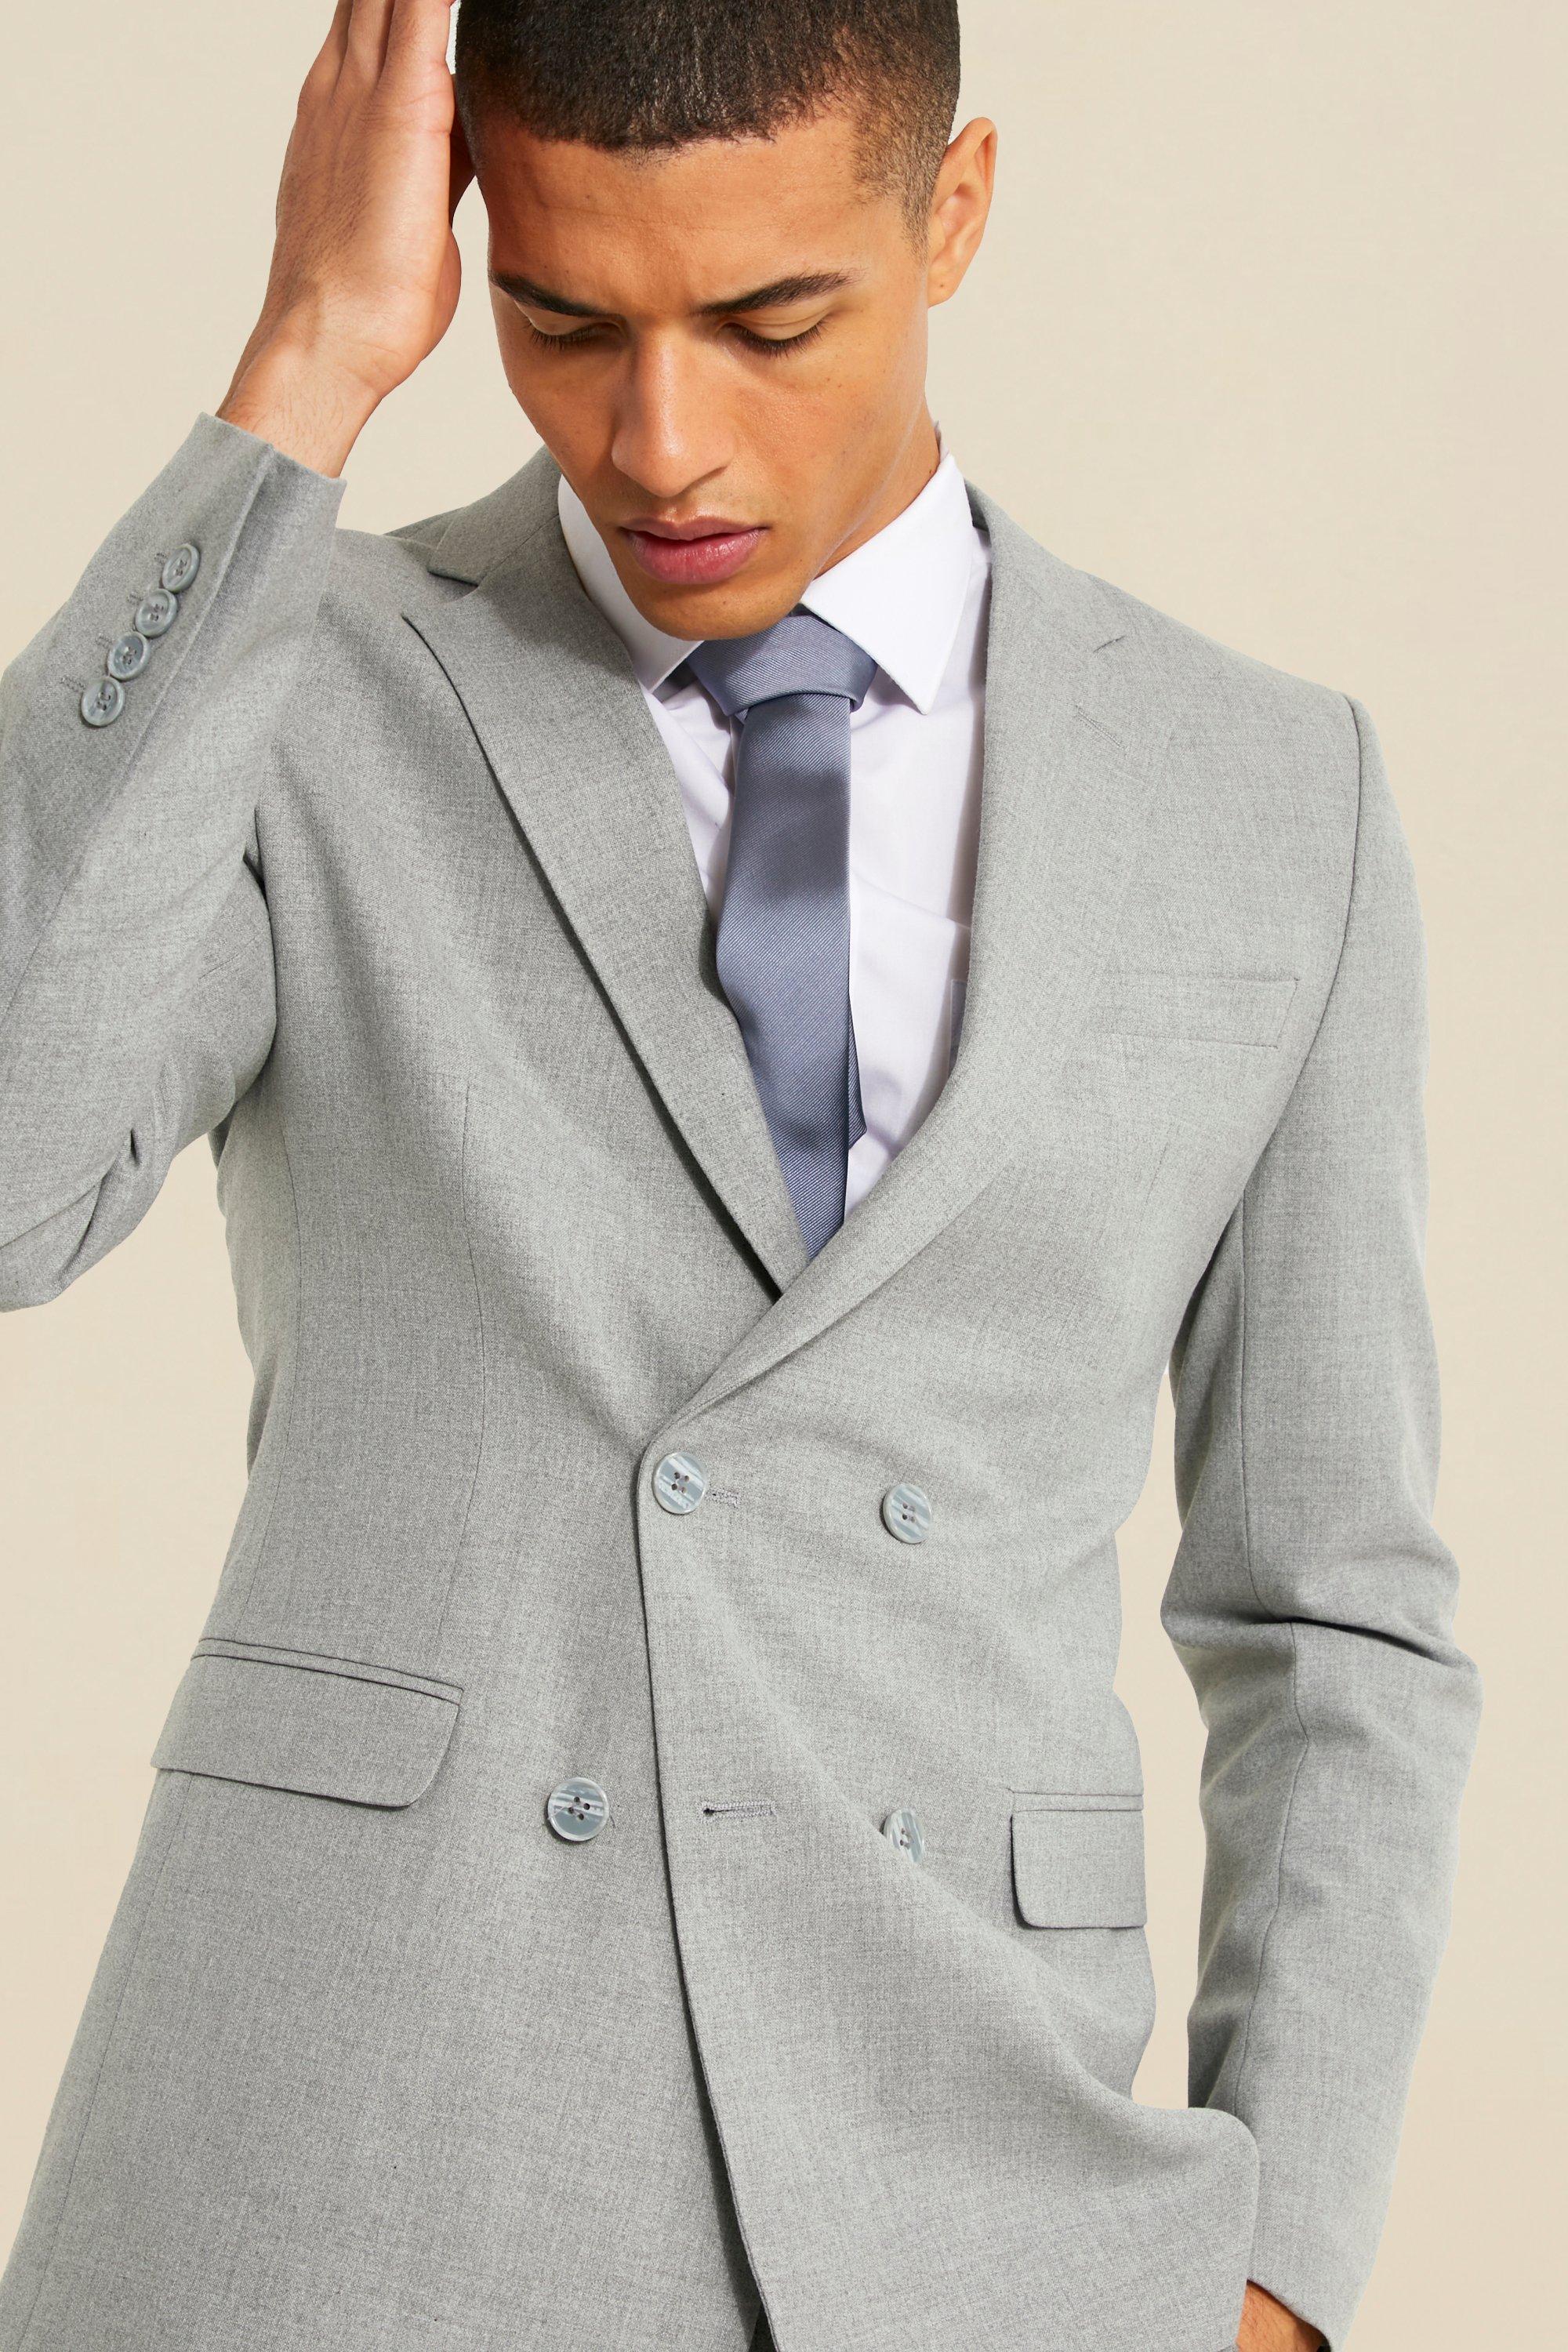 Boohoo Slim Double Breasted Suit Jacket in Light Grey Grey Womens Mens Clothing Mens Jackets Blazers 